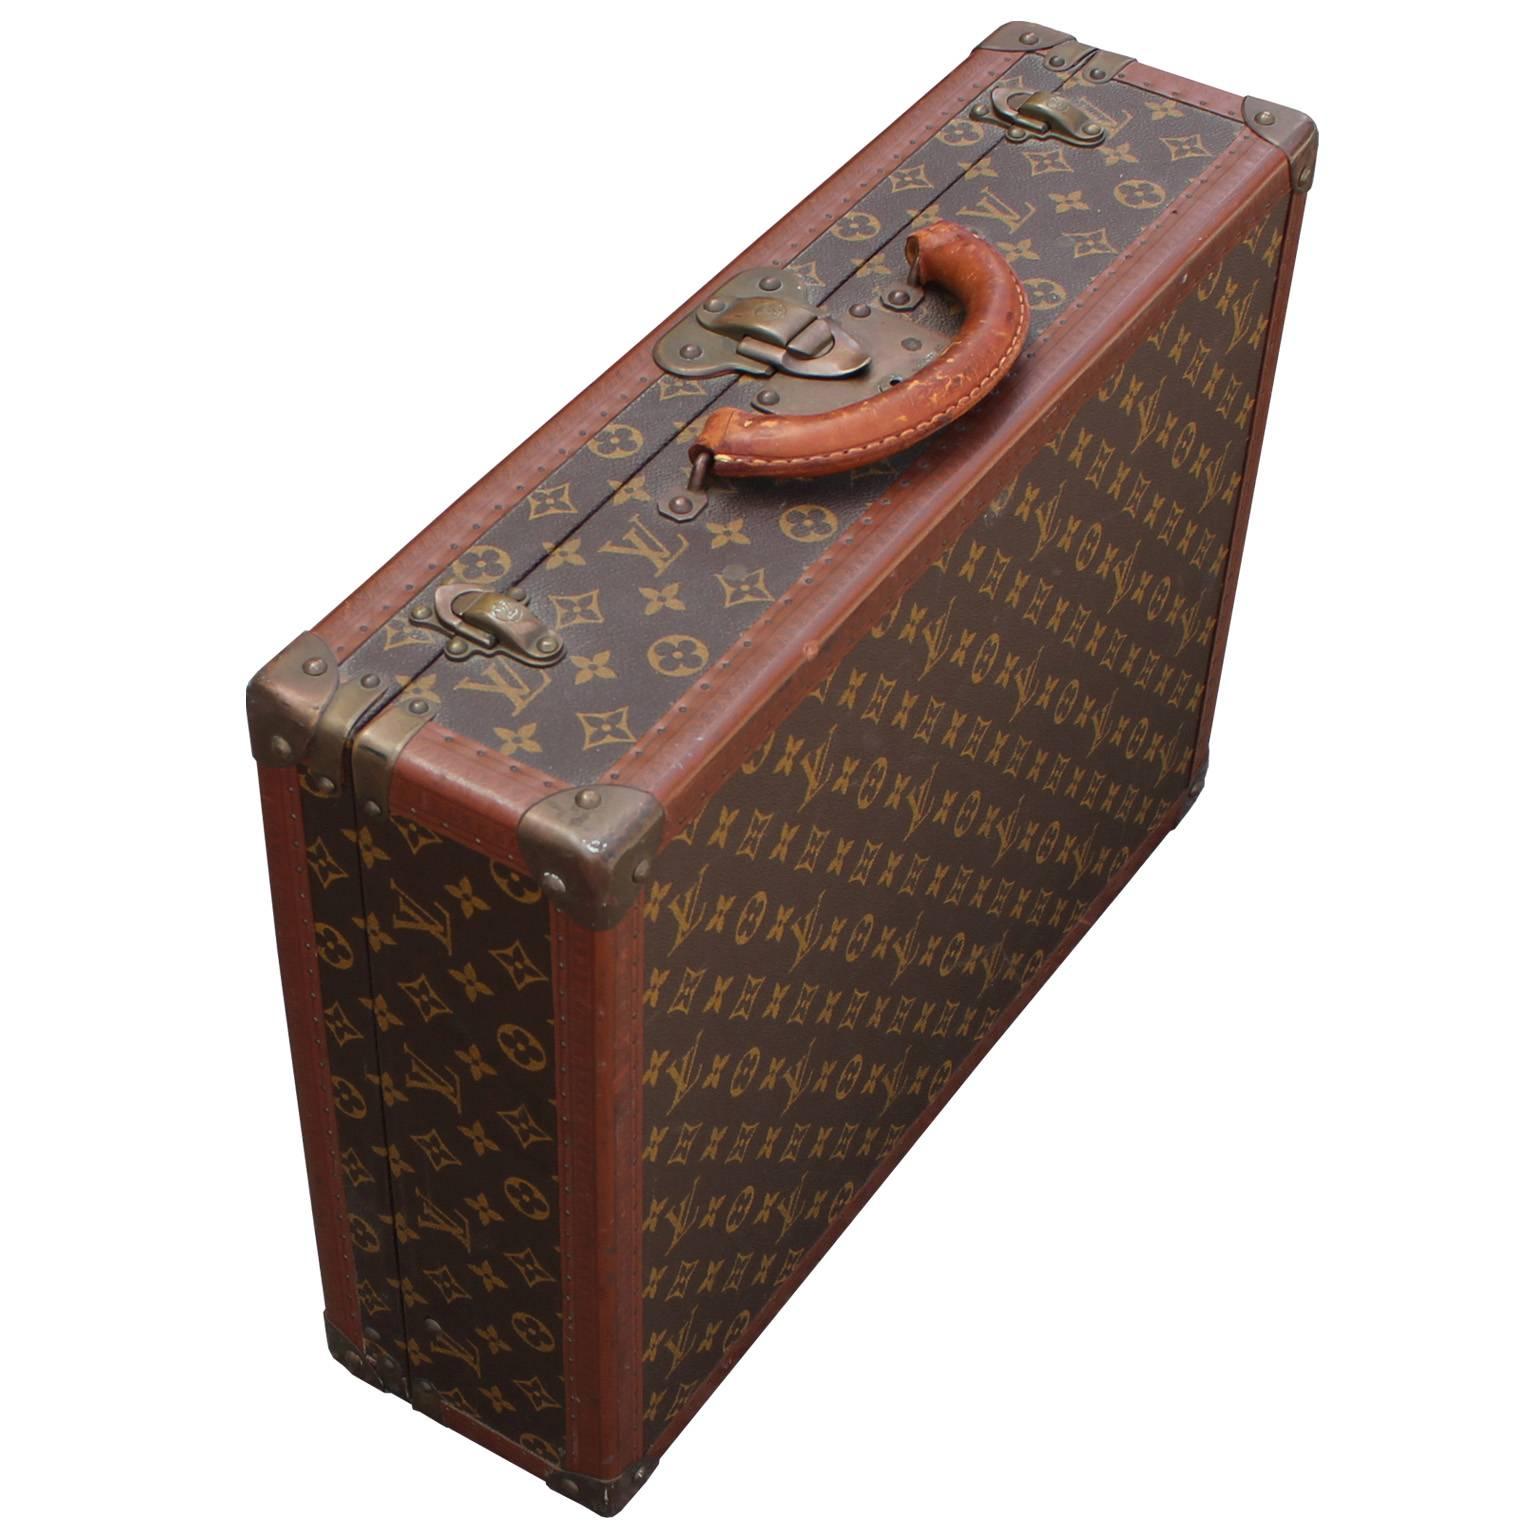 Glamorous Louis Vuitton suitcase in the iconic monogram canvas. Brass fittings and leather trim have an excellent patina. Perfect accent to any space. Inquire for matching, larger sized suitcase.